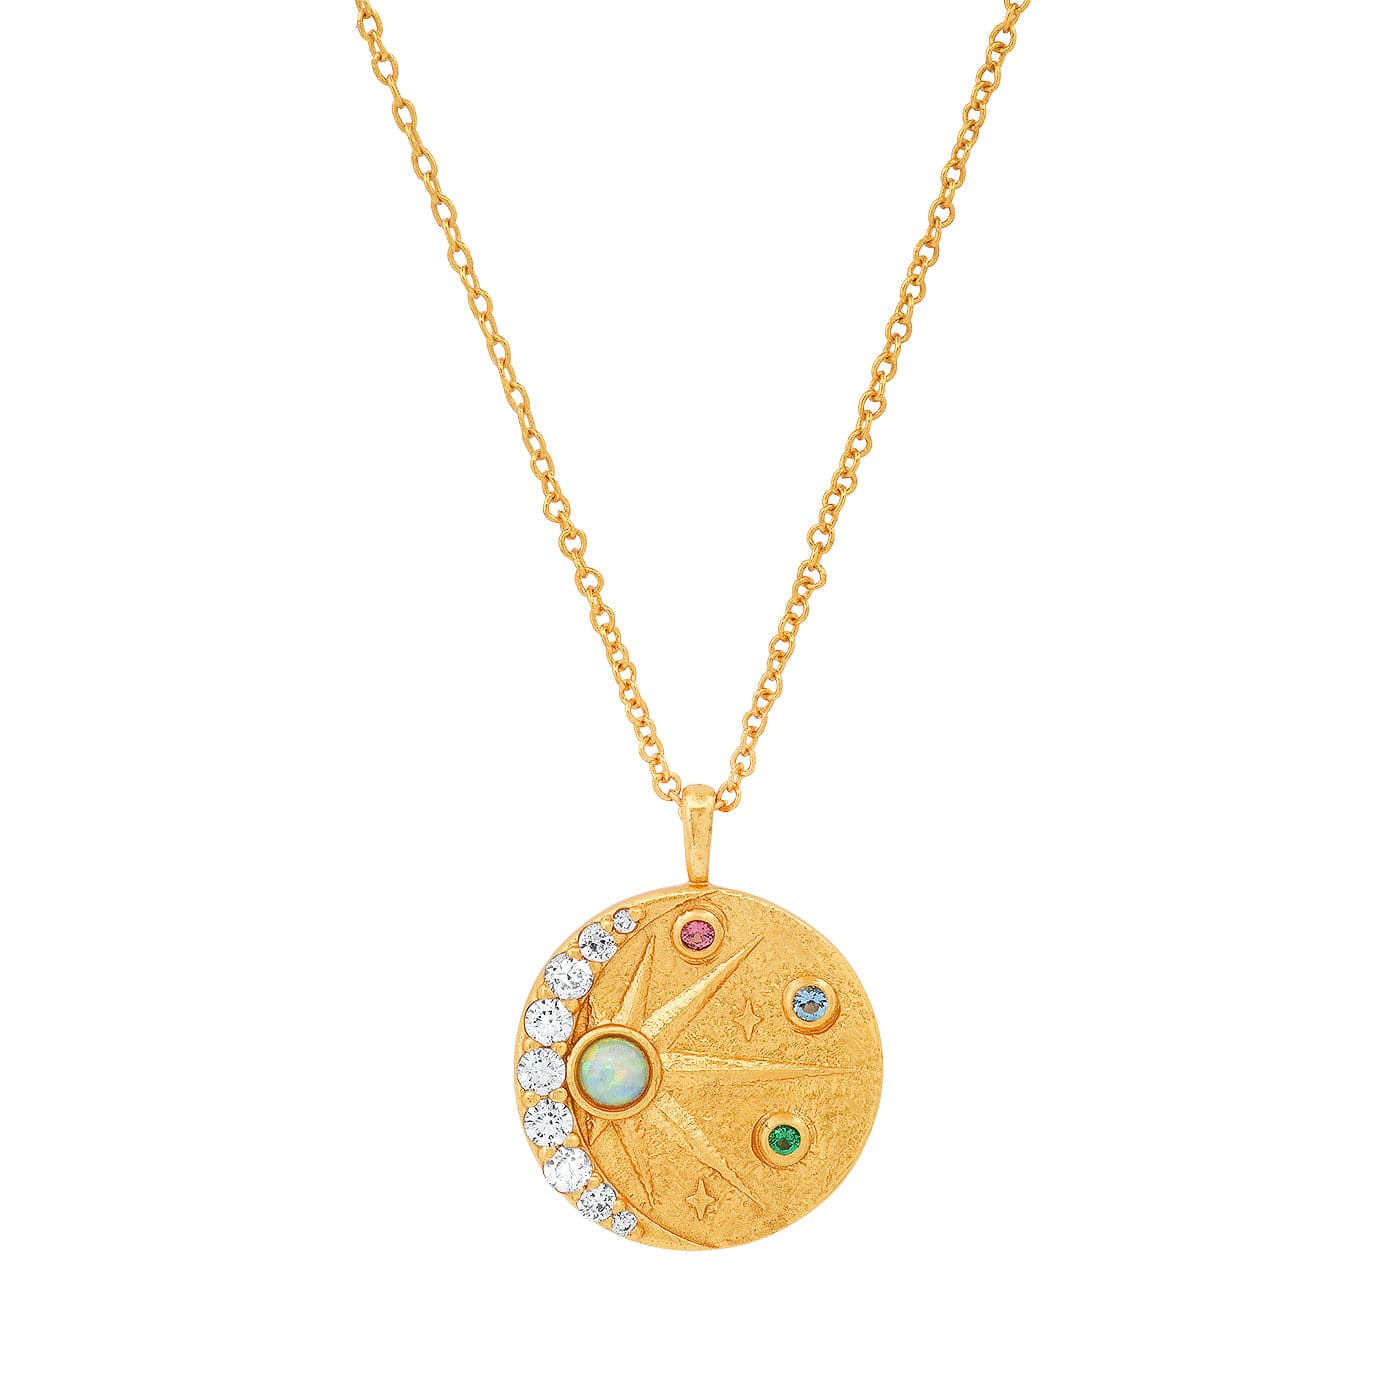 TAI JEWELRY Necklace Star and Moon Coin Necklace